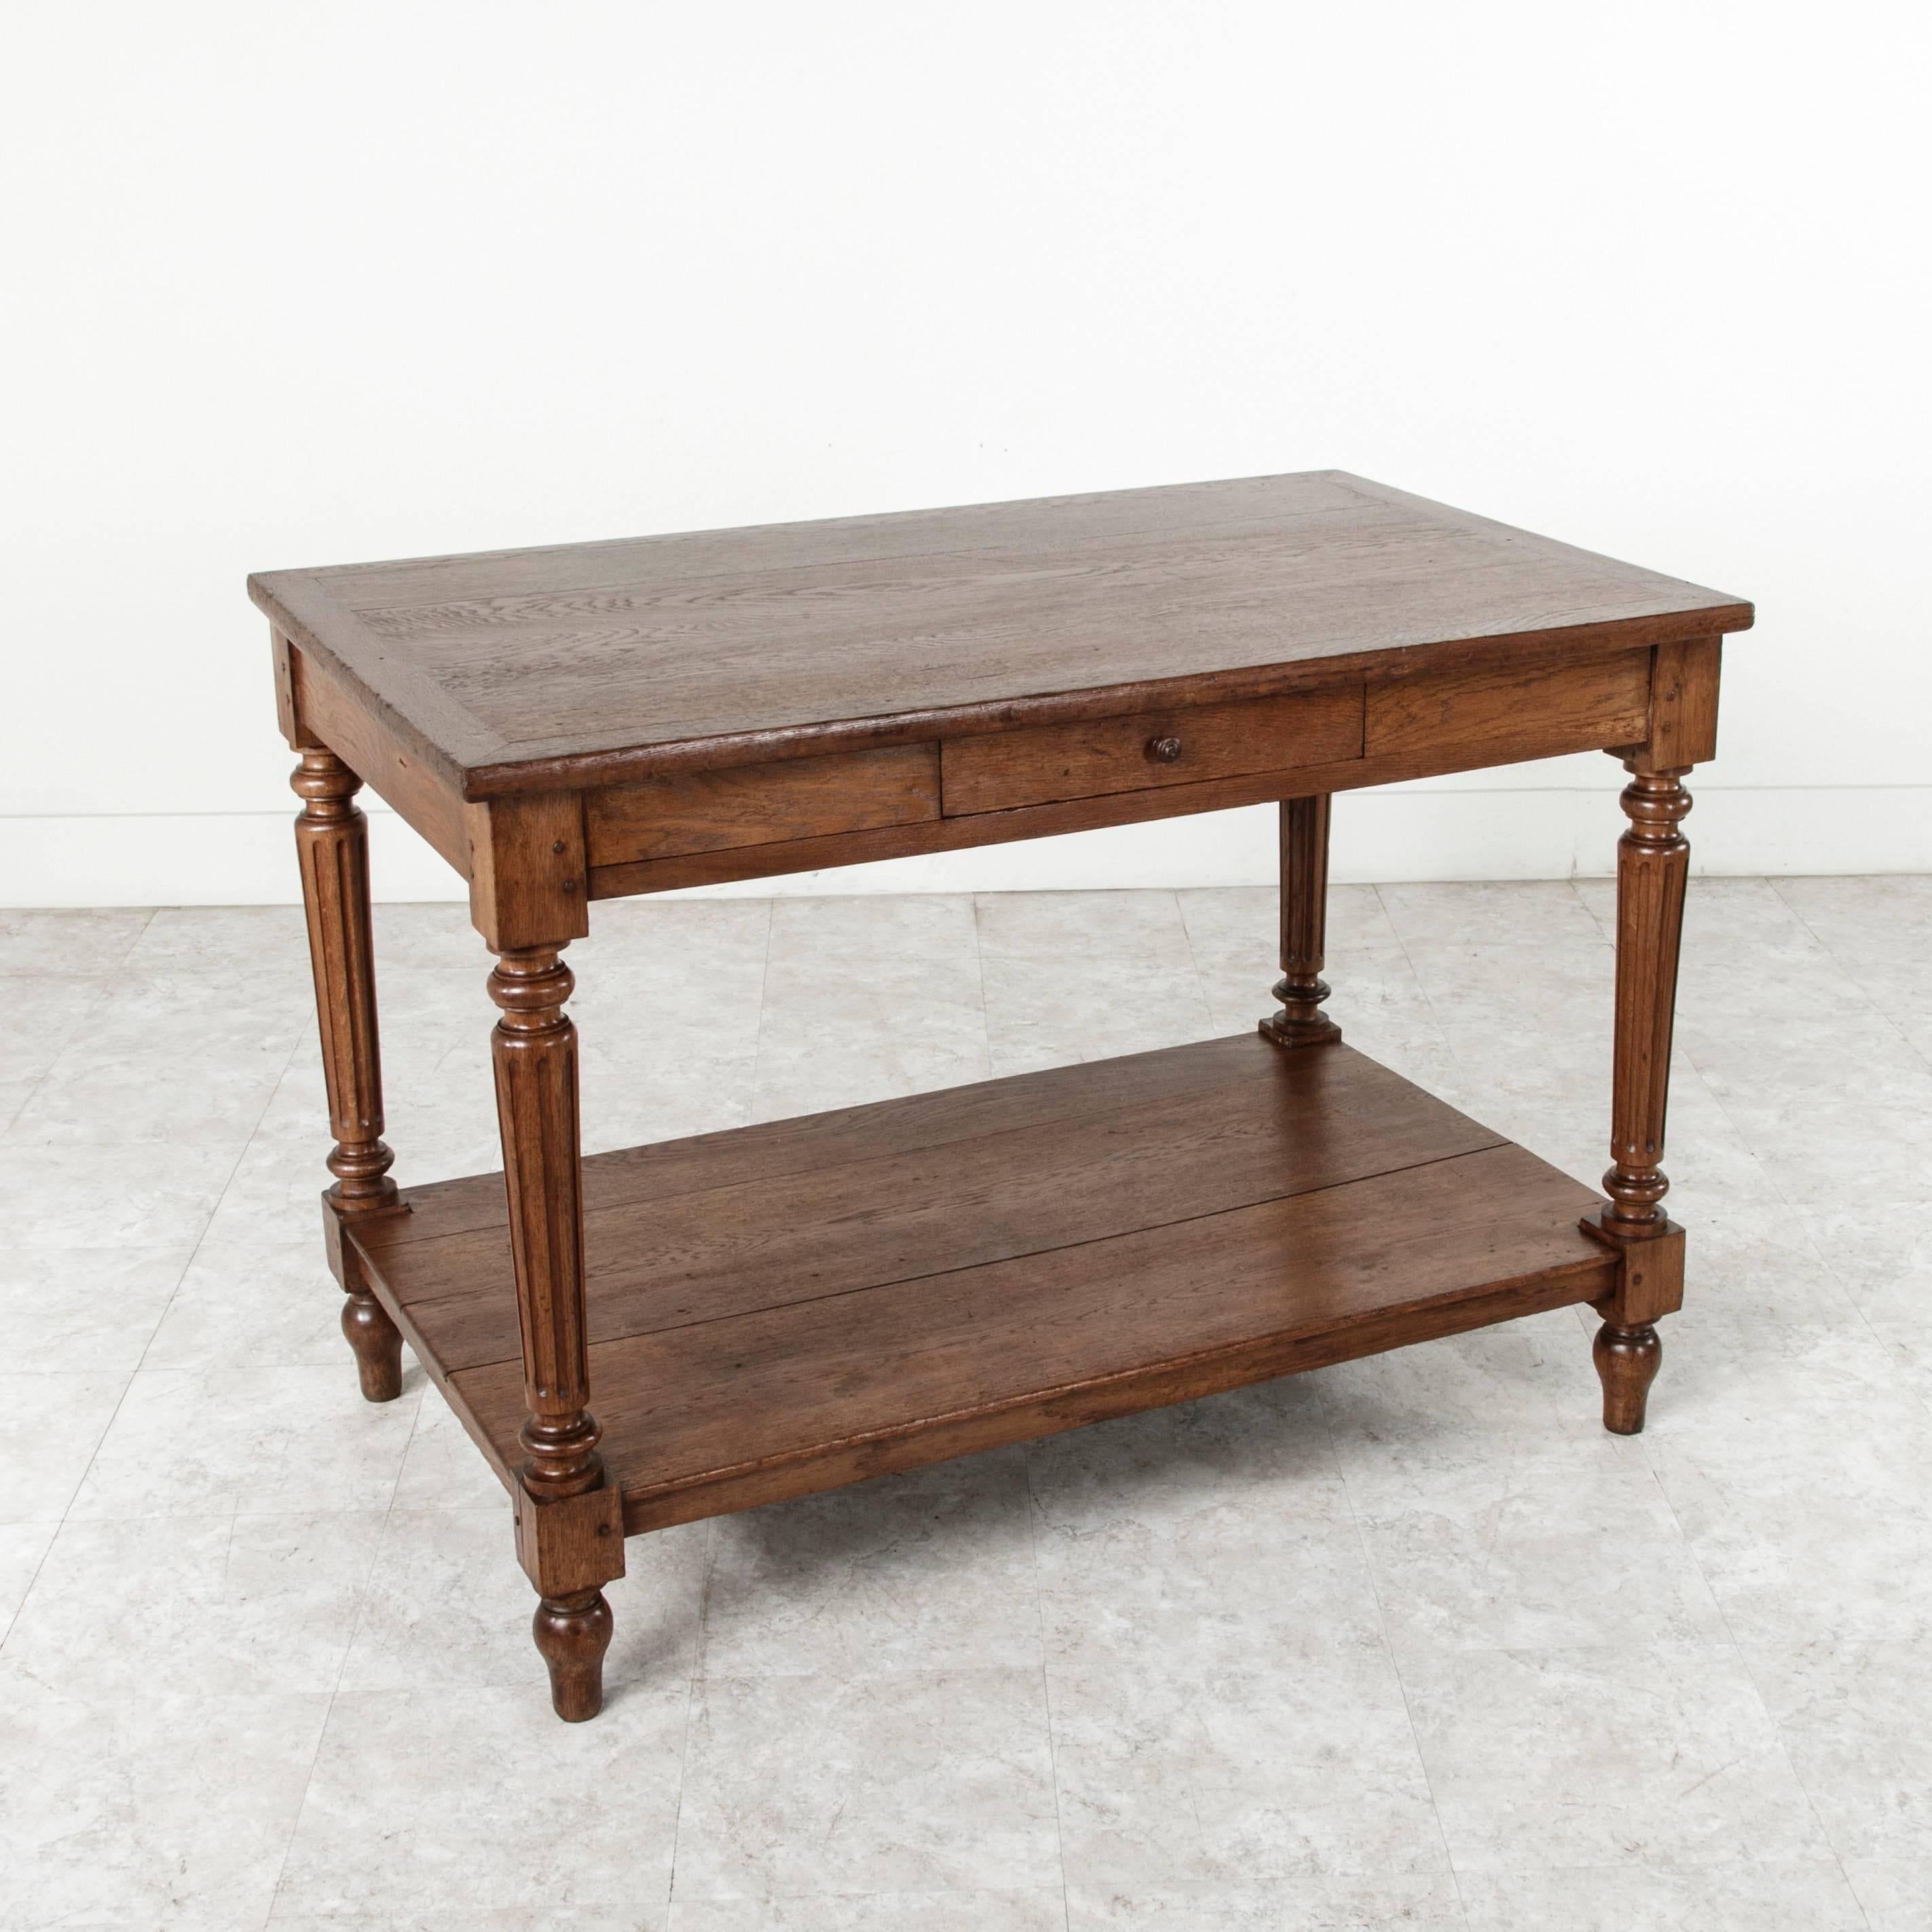 Constructed of hand pegged solid oak, this fabric presentation table was used in a fabric shop to present large swaths of fabric to customers. Its two tiers, drawer, and height make this piece ideal for use as a kitchen island. Additionally, its